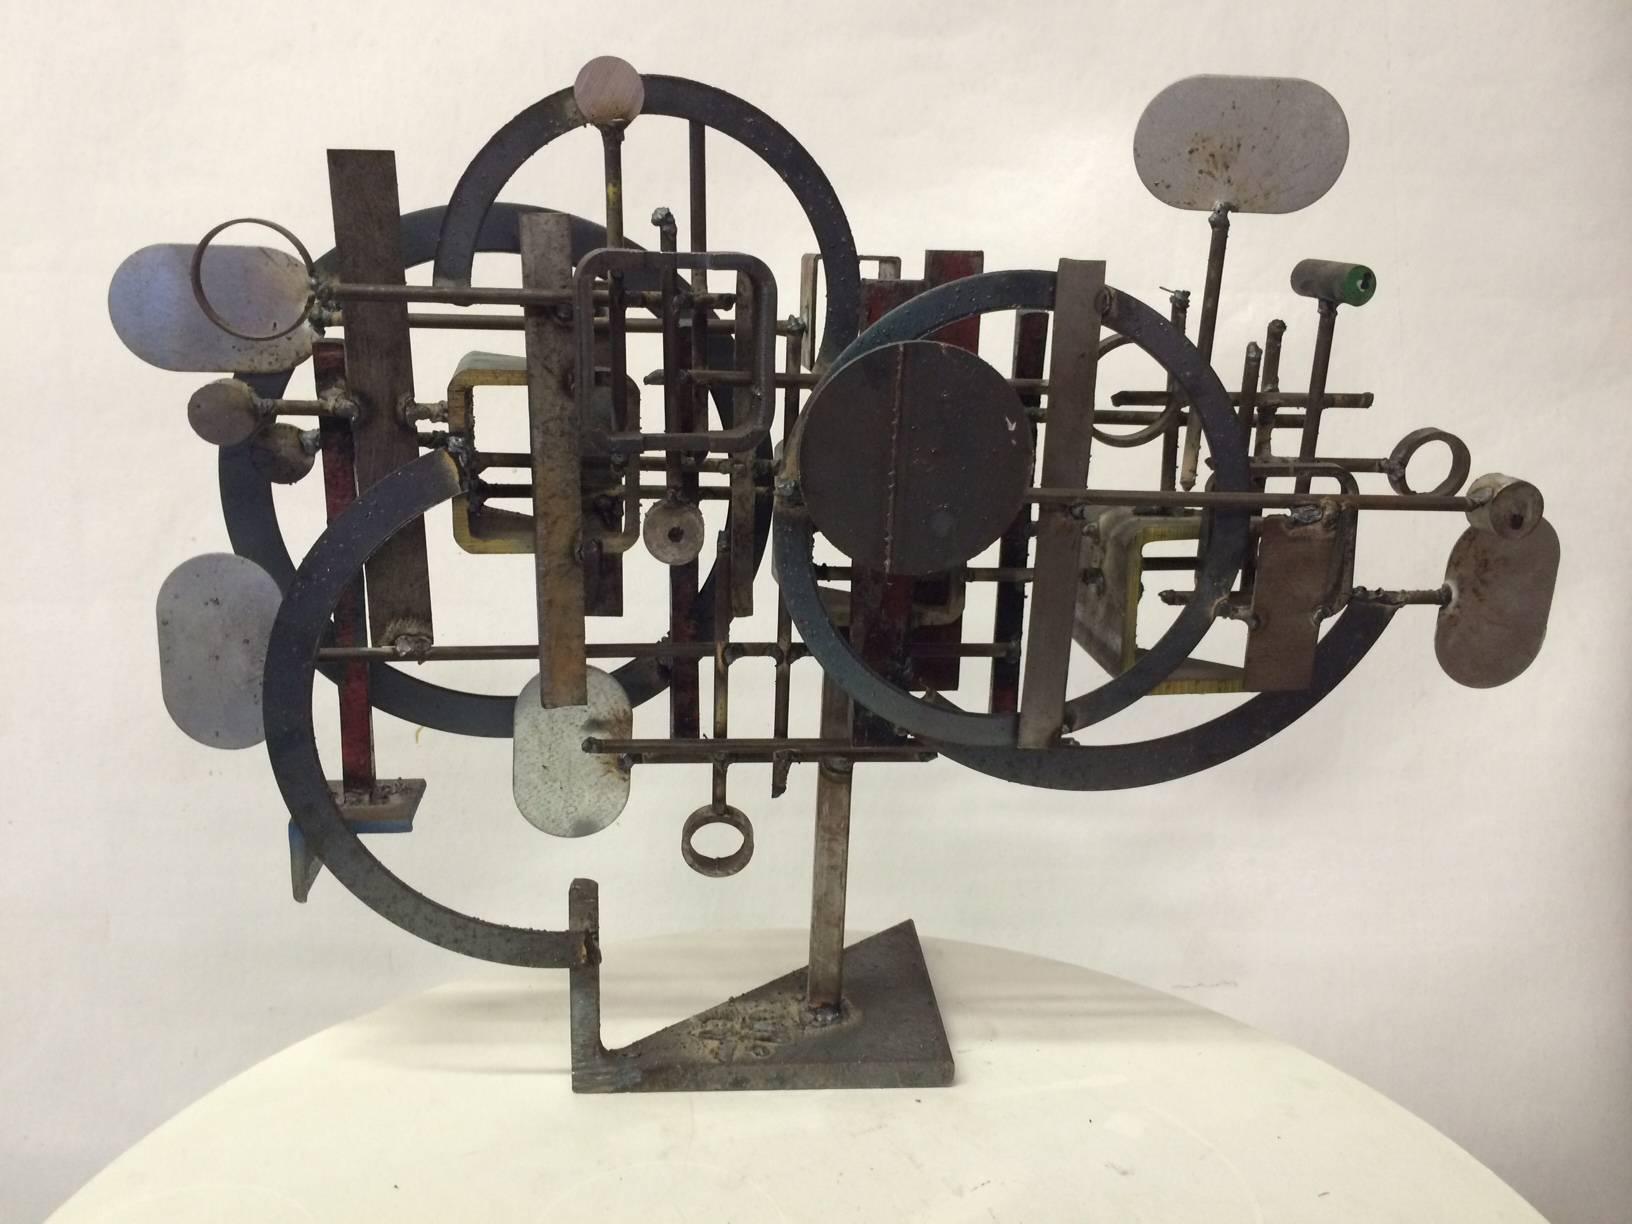 This table sculpture is the work of California artist Frank Cota. The piece's composition - an interplay of circular, square and rectangular forms - creates an eye-catching Brutalist form. The metal has great patina with some rust and faded paint.